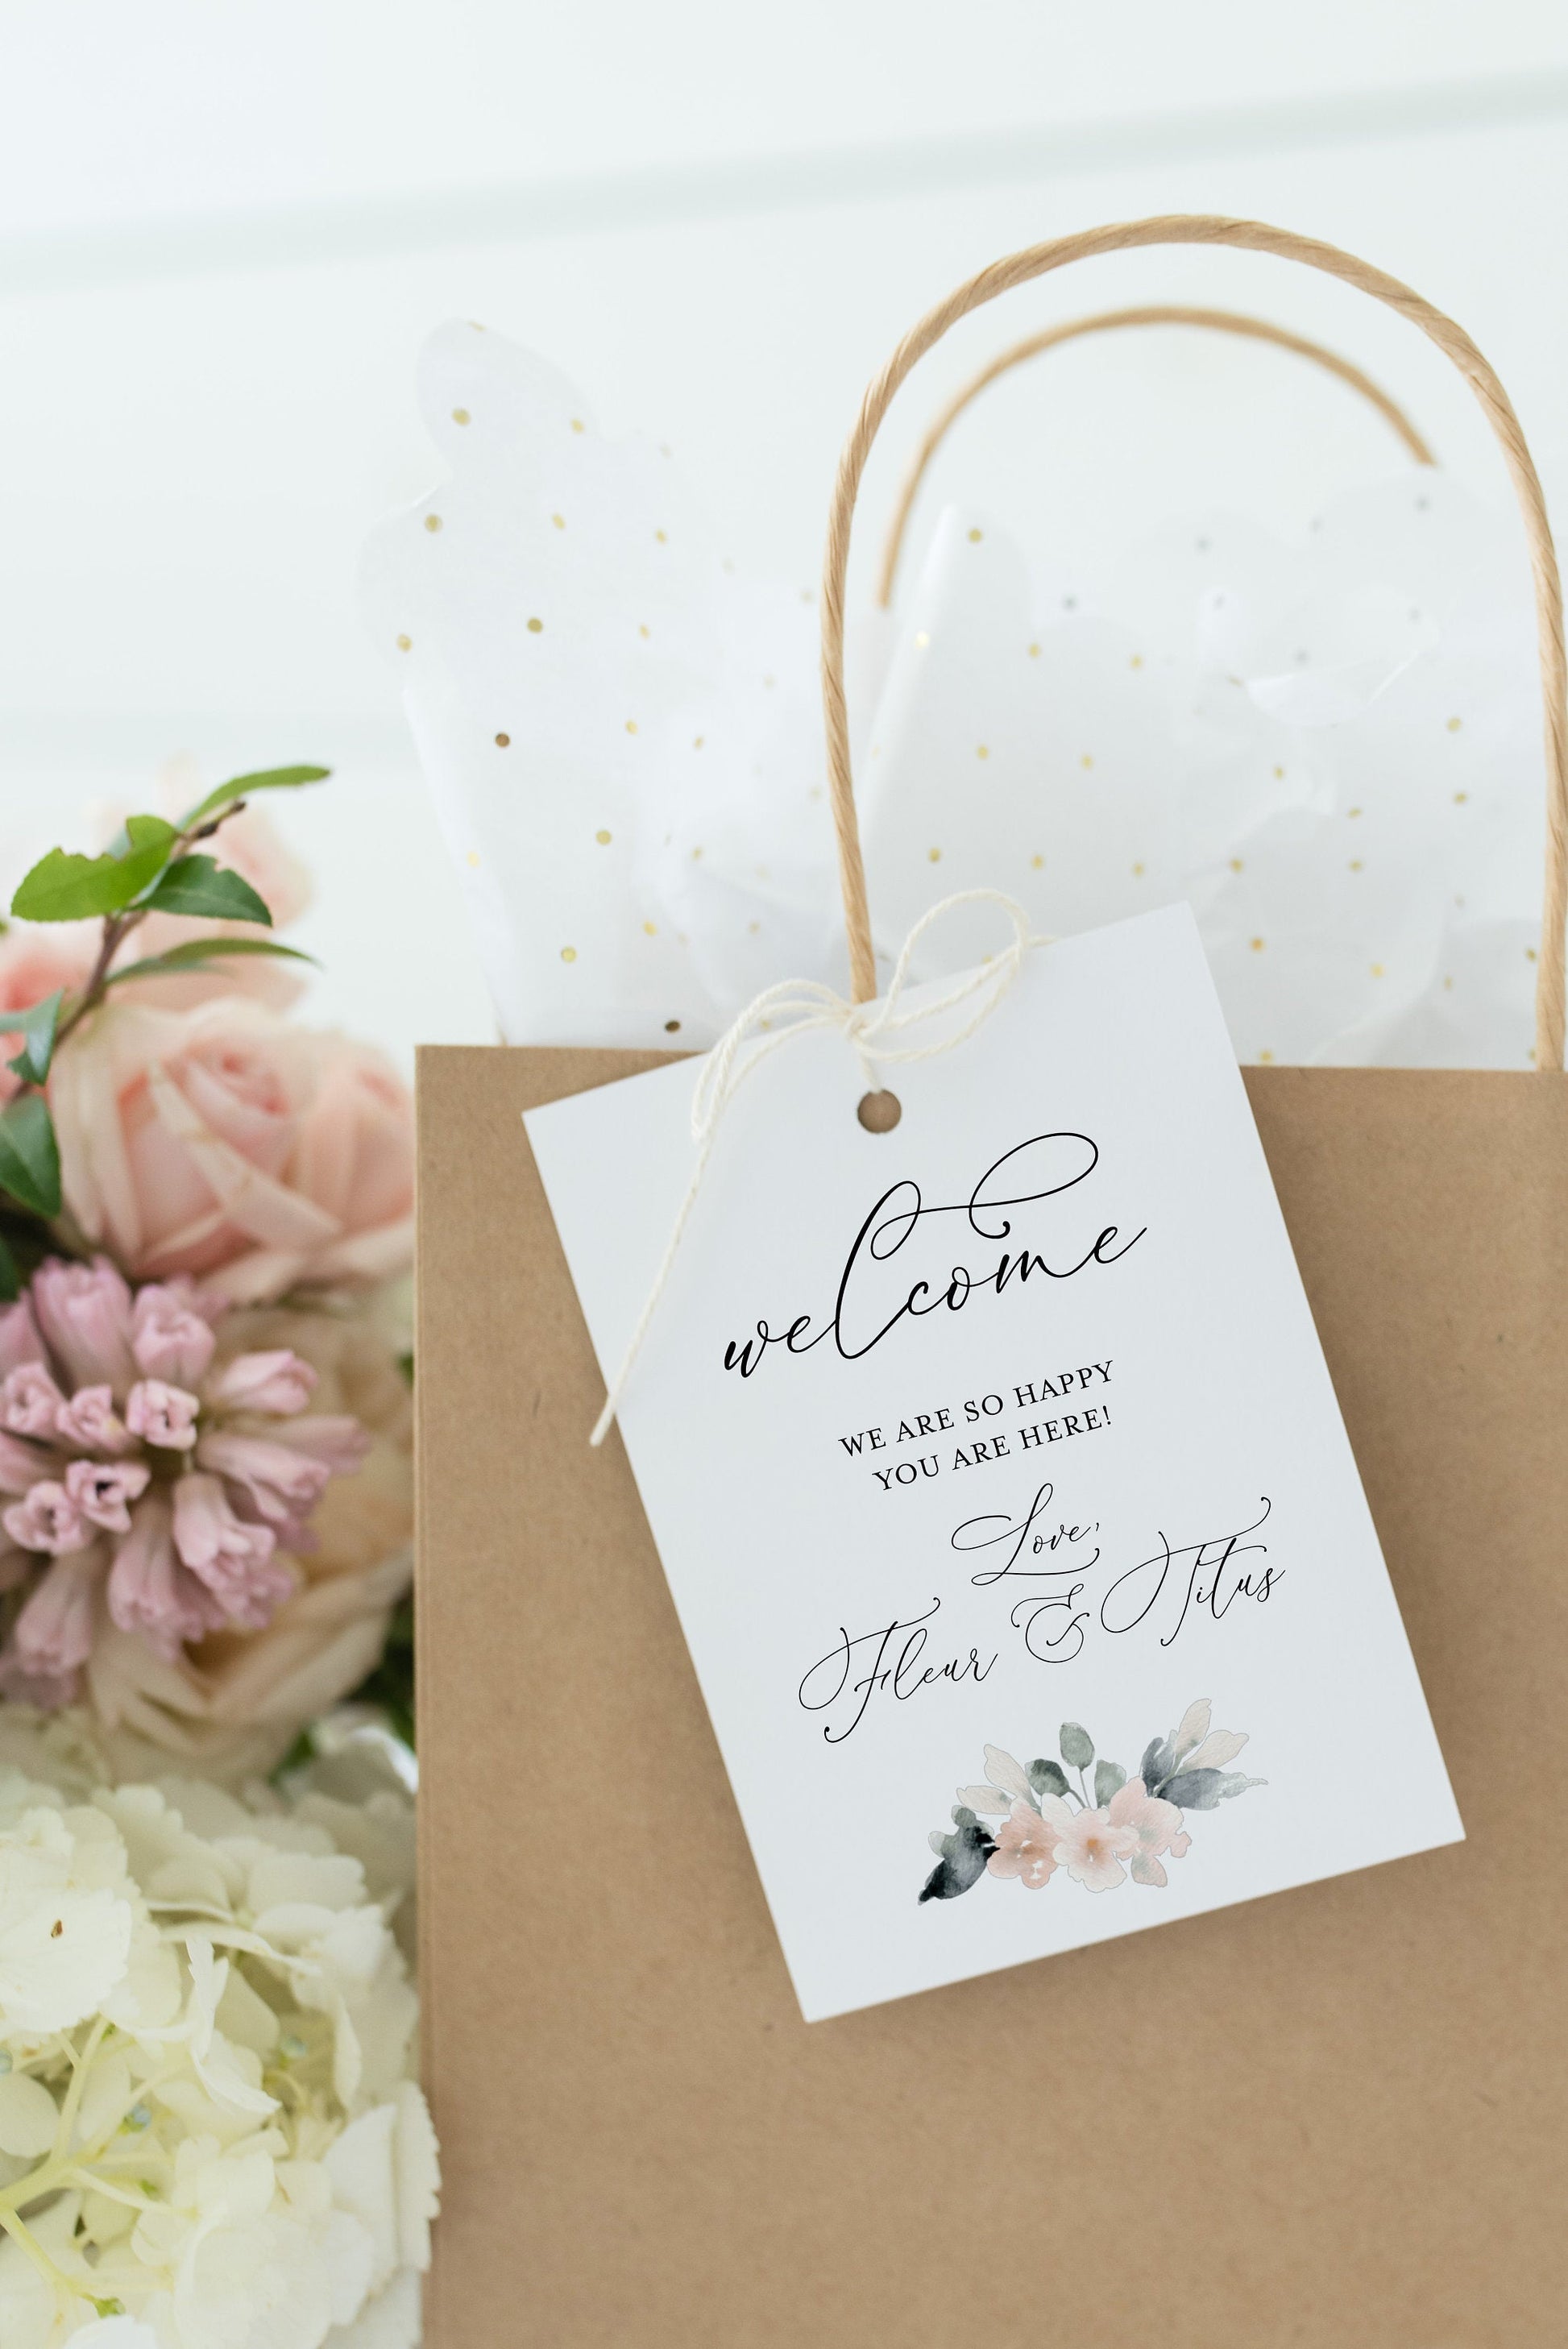 Printable Welcome Wedding Gift Bag Tags Favors Instant Download, 100% Editable- Fleur TAGS | TY | INSERTS SAVVY PAPER CO